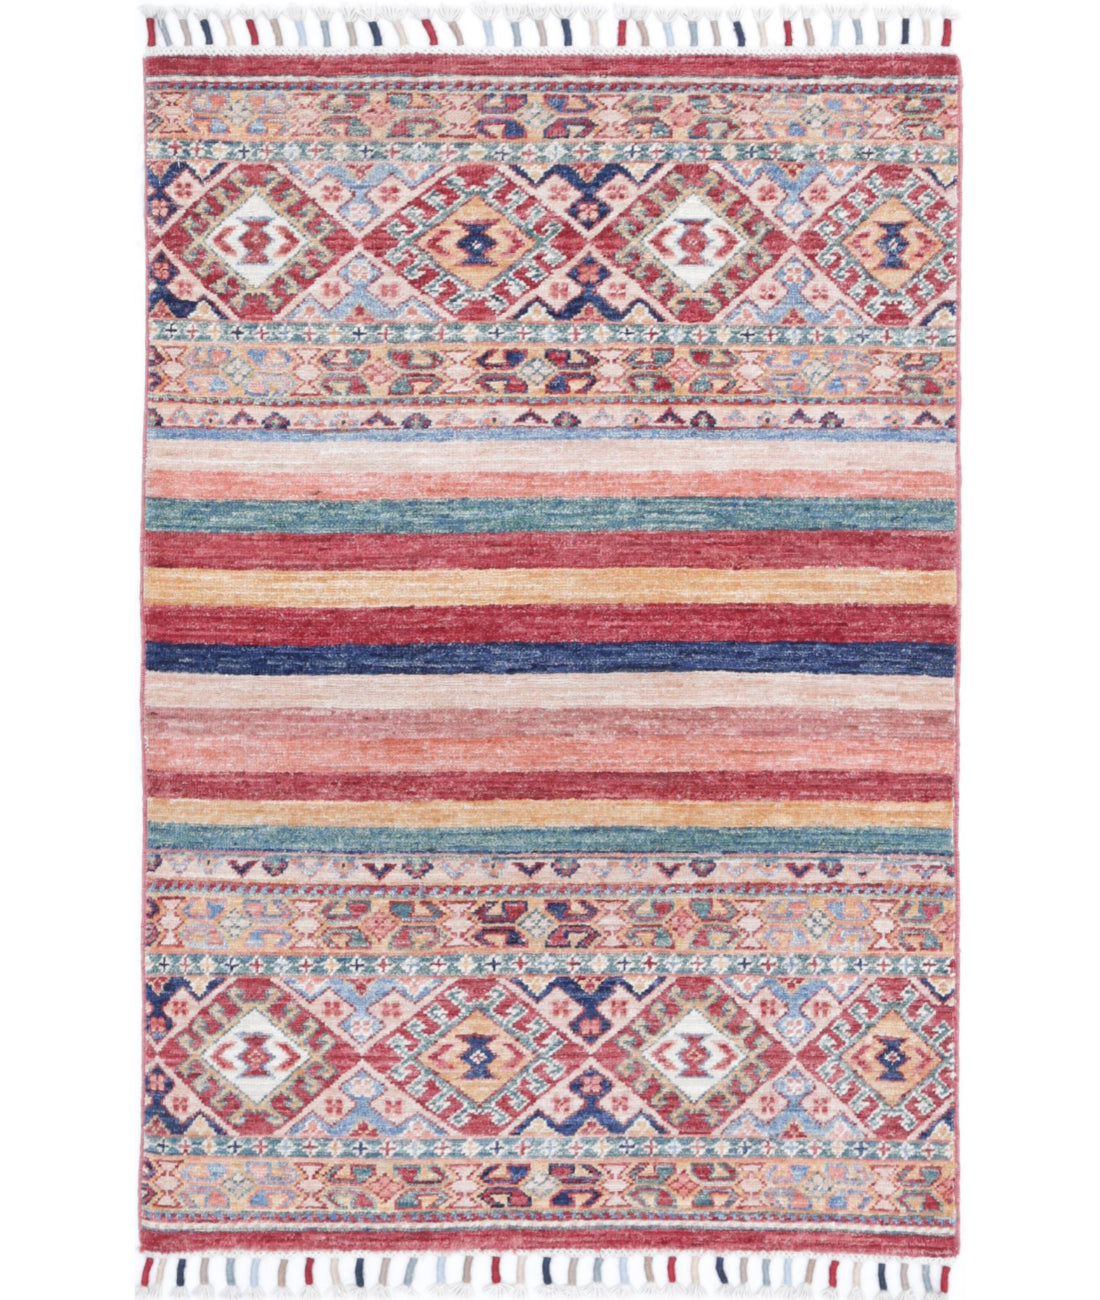 Hand Knotted Khurjeen Wool Rug - 2&#39;6&#39;&#39; x 3&#39;10&#39;&#39; 2&#39;6&#39;&#39; x 3&#39;10&#39;&#39; (75 X 115) / Multi / Multi